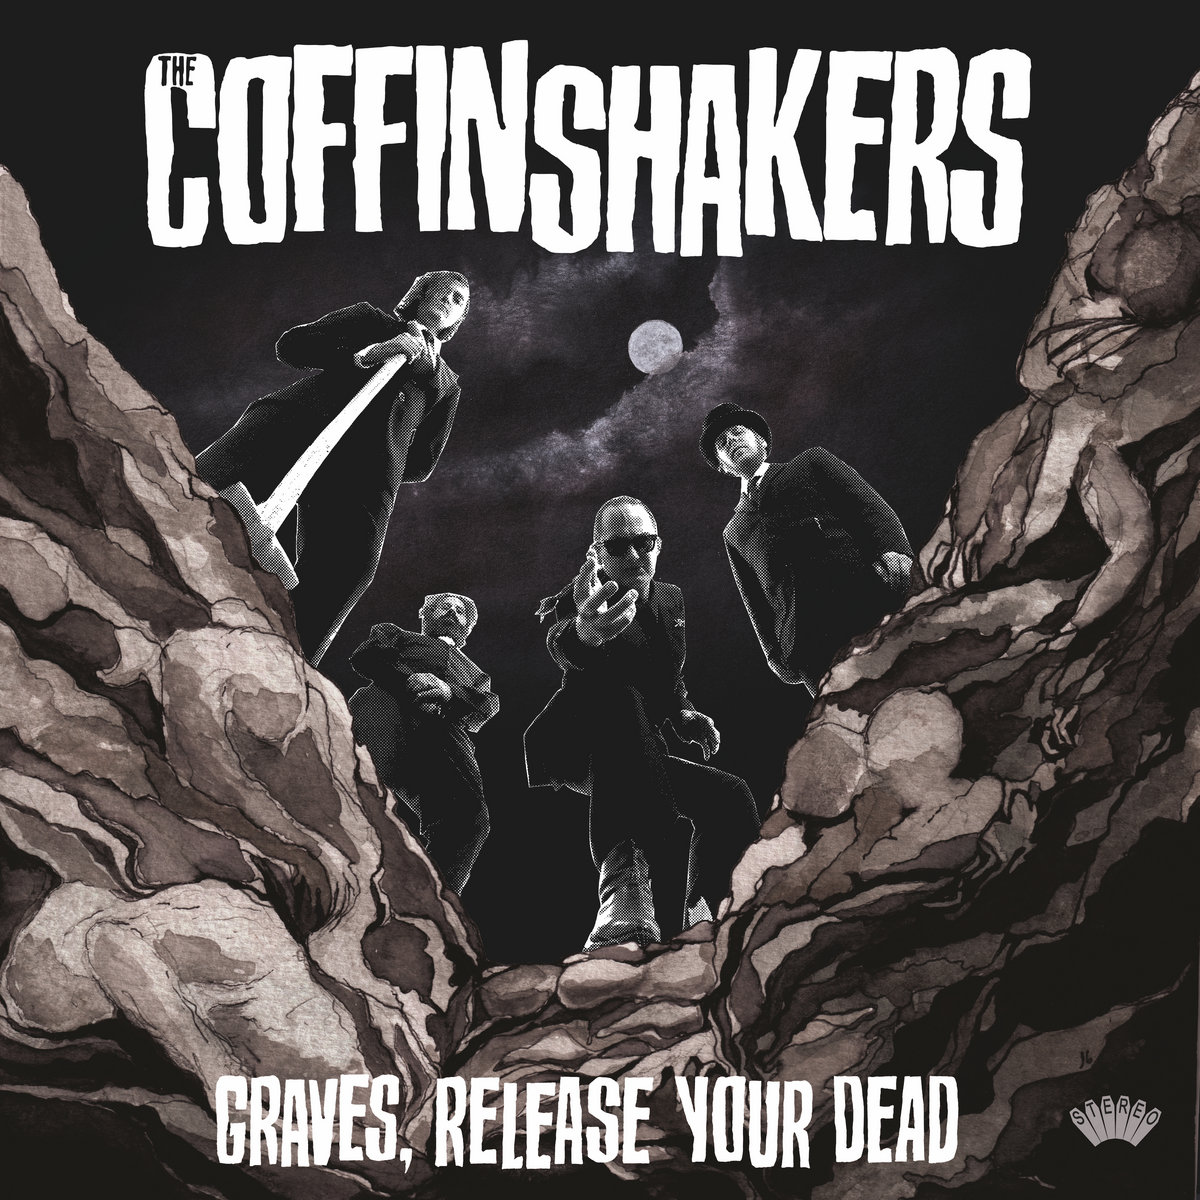 Coffinshakers, The - Graves, Release Your Dead (Blood Red Vinyl) - LP